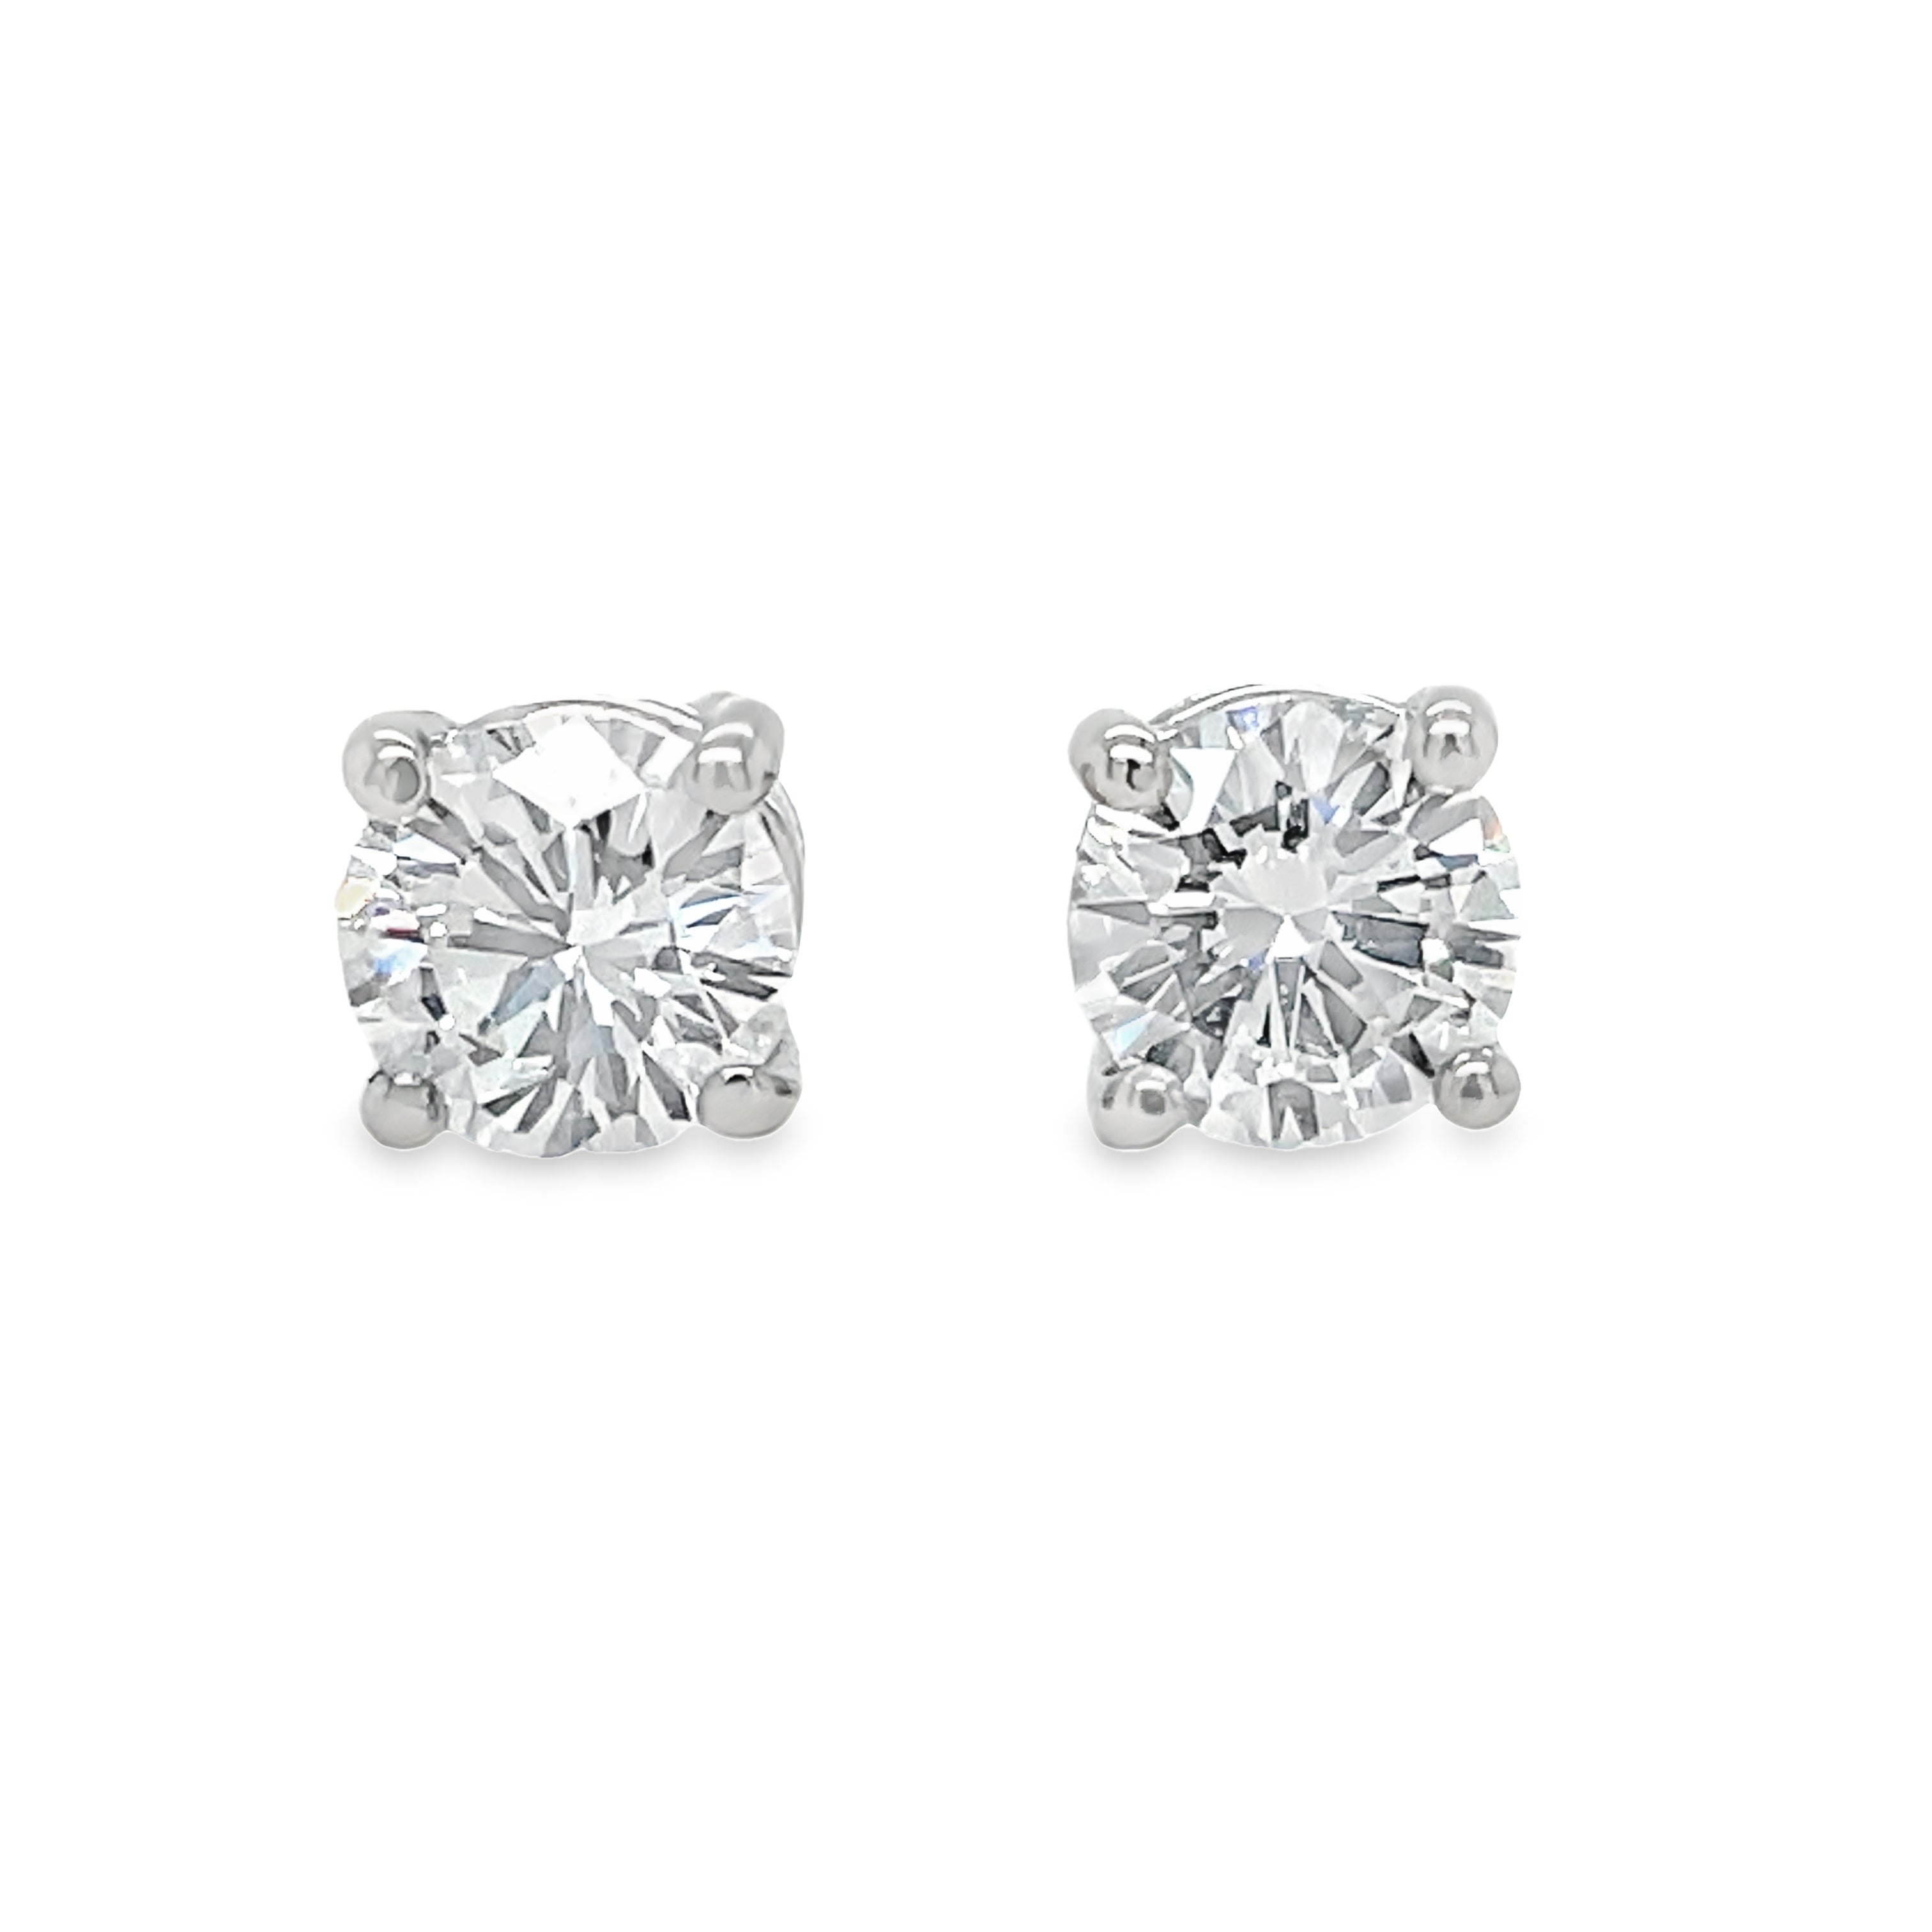 Elevate your style with our exquisite Diamond Stud Earrings! Crafted with two round brilliant diamonds, basket set in sleek 14k white gold, these earrings exude timeless elegance. Showcasing H color and VVS clarity, they're the perfect addition to any jewelry collection. Order now and shine bright like a diamond!